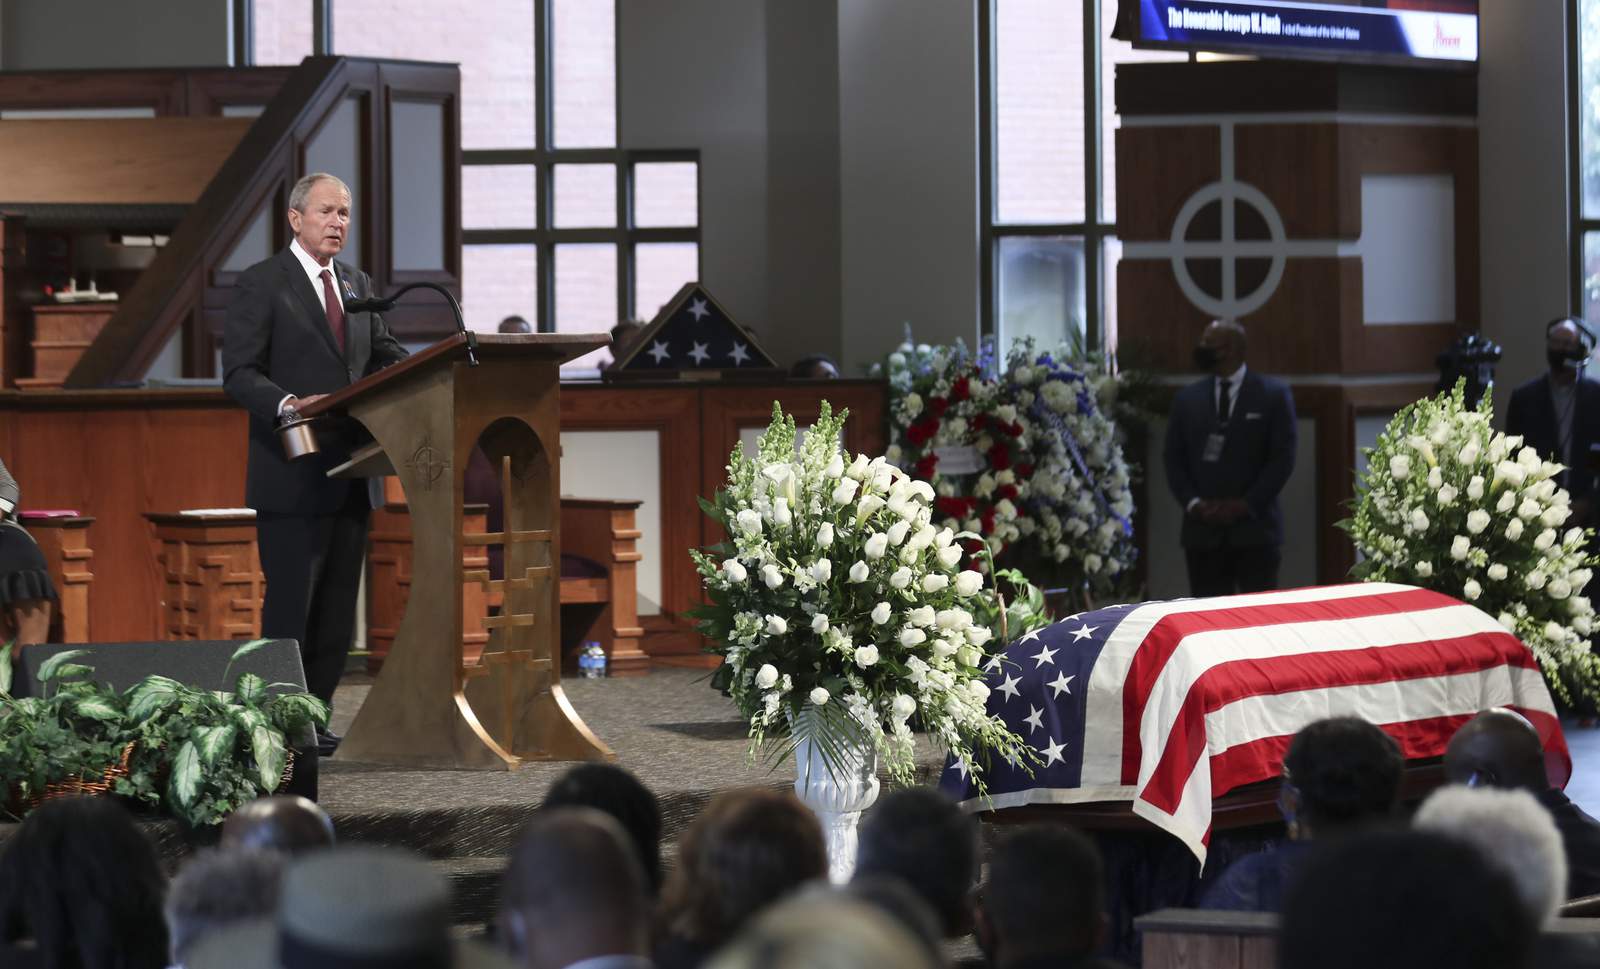 WATCH: Funeral service for Rep. John Lewis